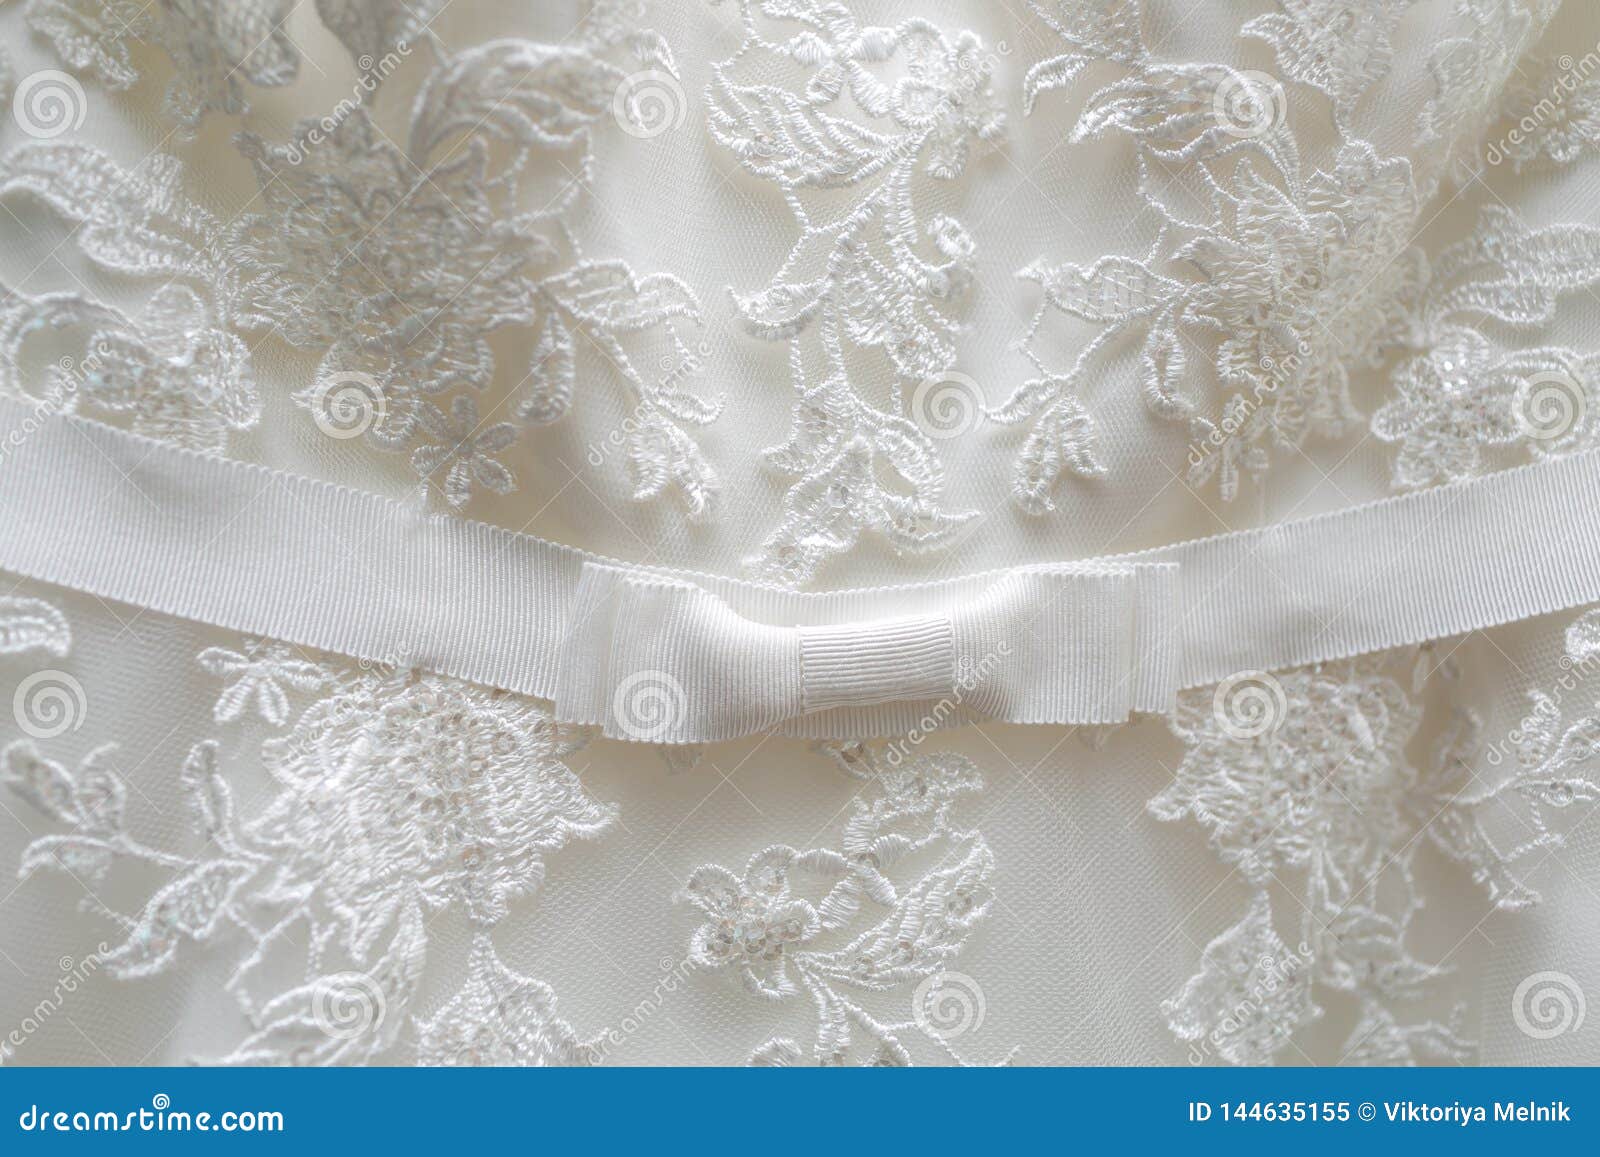 White Tulle Material with Patterns in the Shape of Flowers and a Bow in the  Middle. Stock Image - Image of clothing, material: 144635155